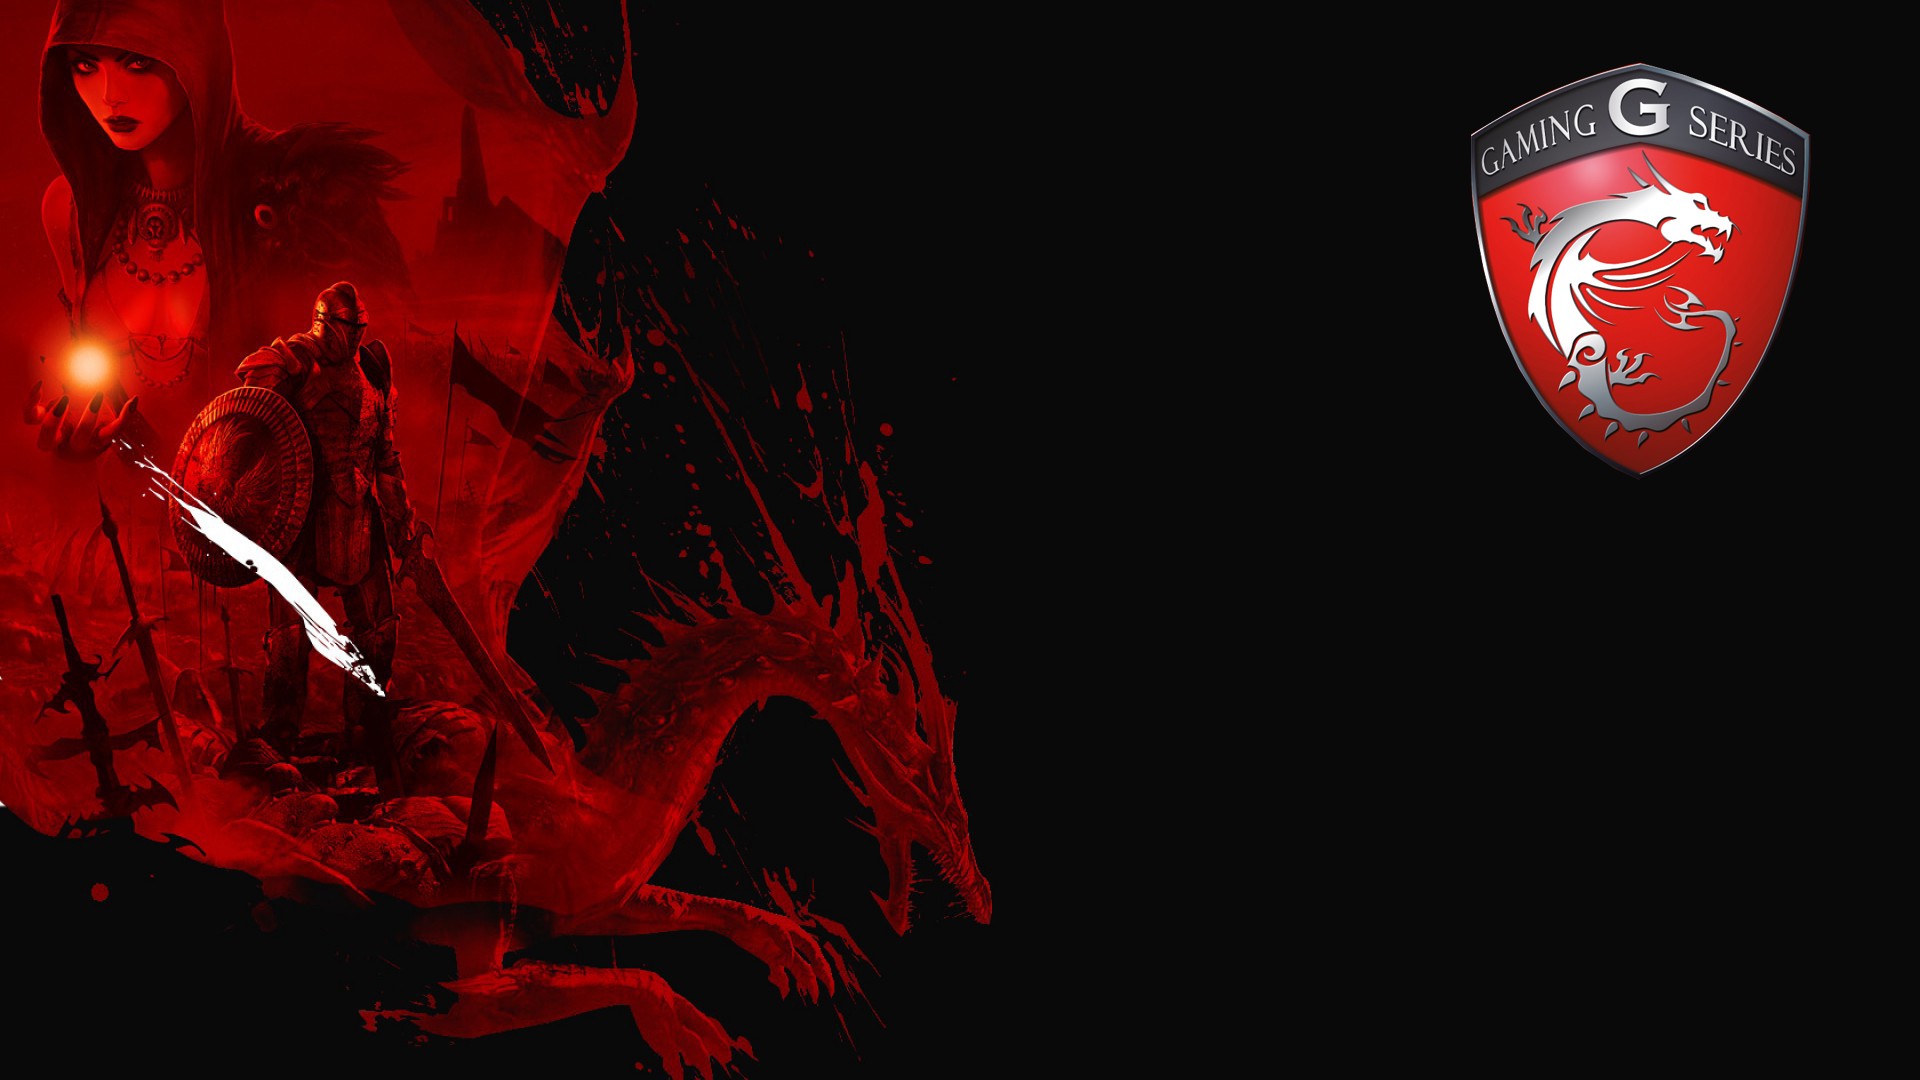 Free download MSI Wallpaper HD Full HD Pictures [1920x1080] for your